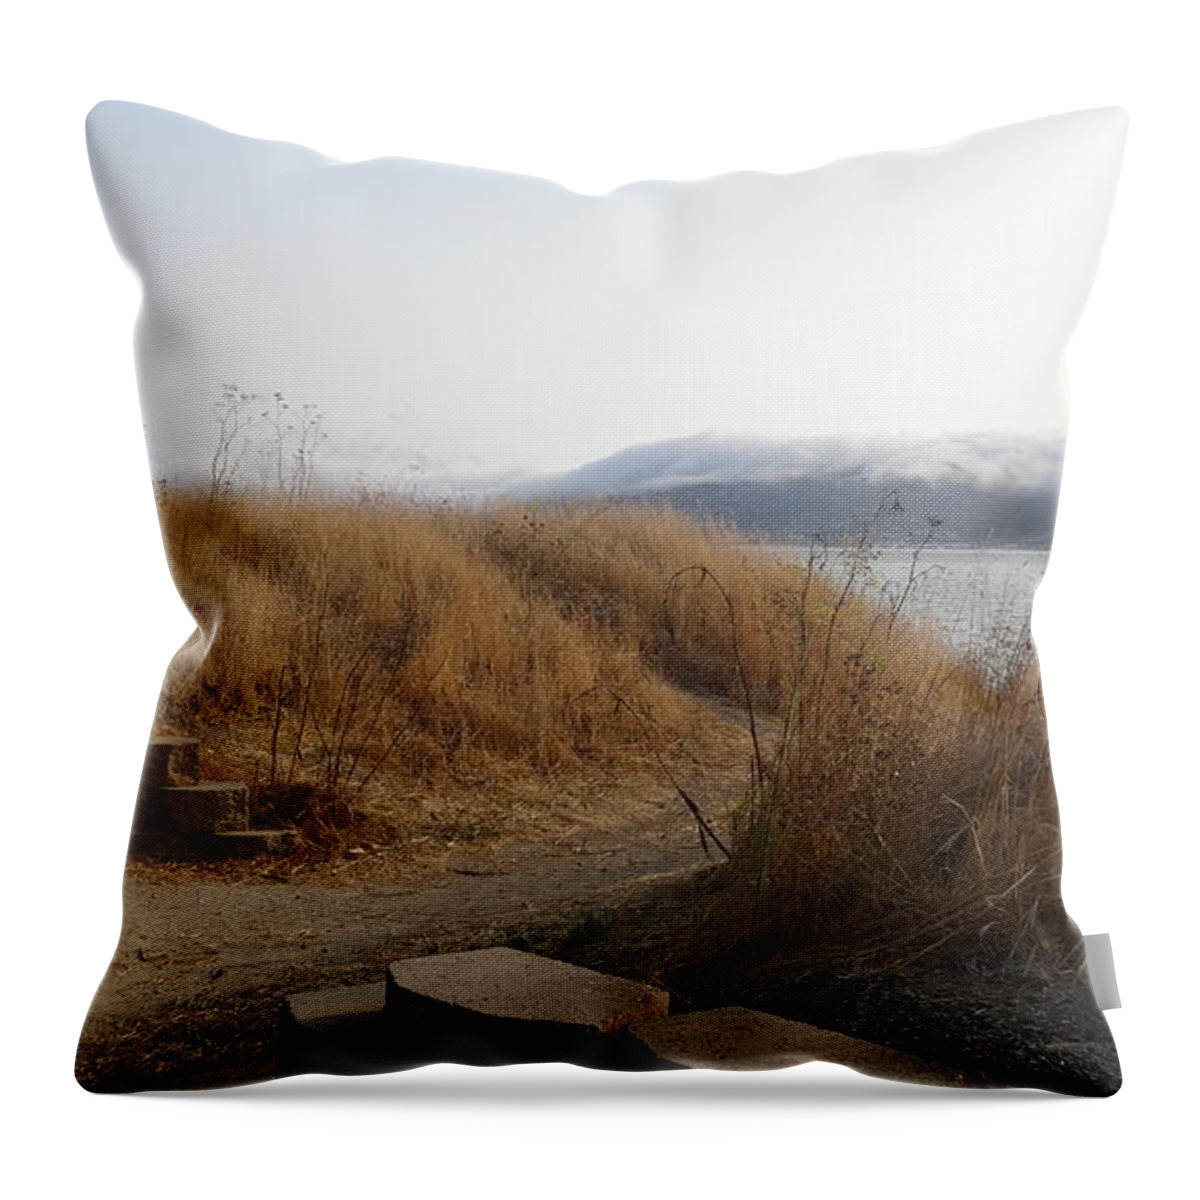 Photography Throw Pillow featuring the digital art No Separation by Richard Laeton